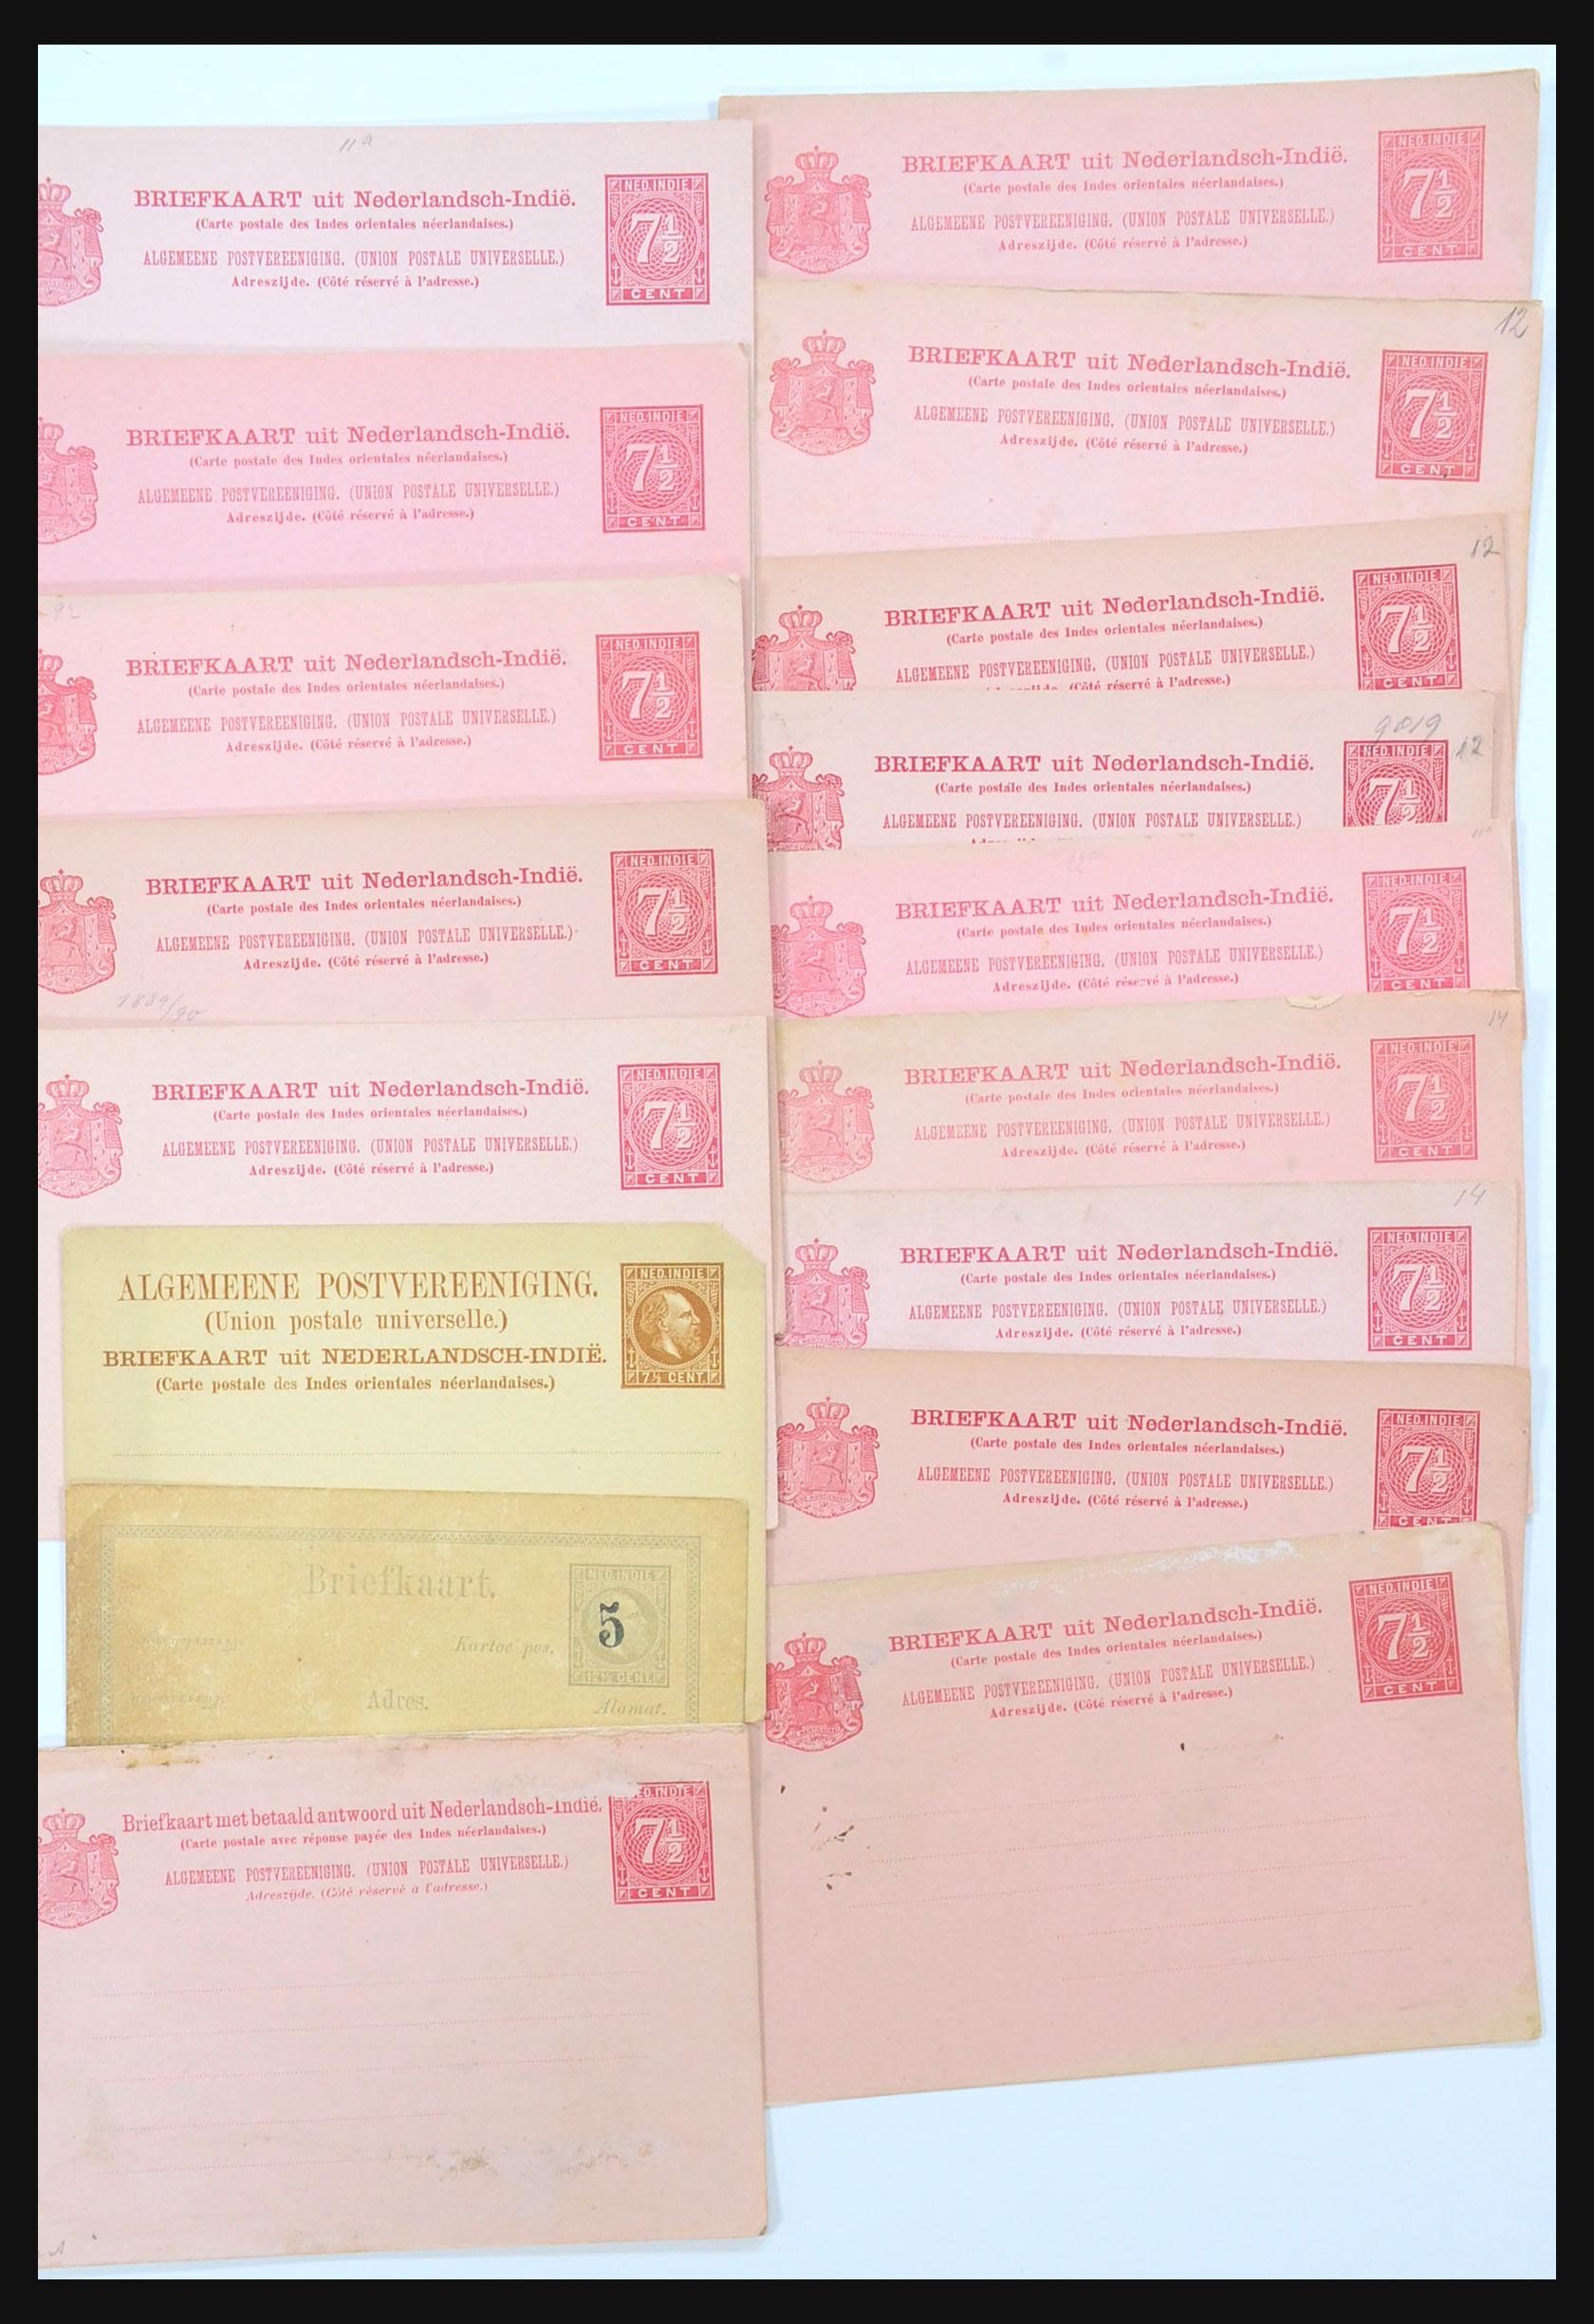 31361 007 - 31361 Netherlands Indies covers 1880-1950.